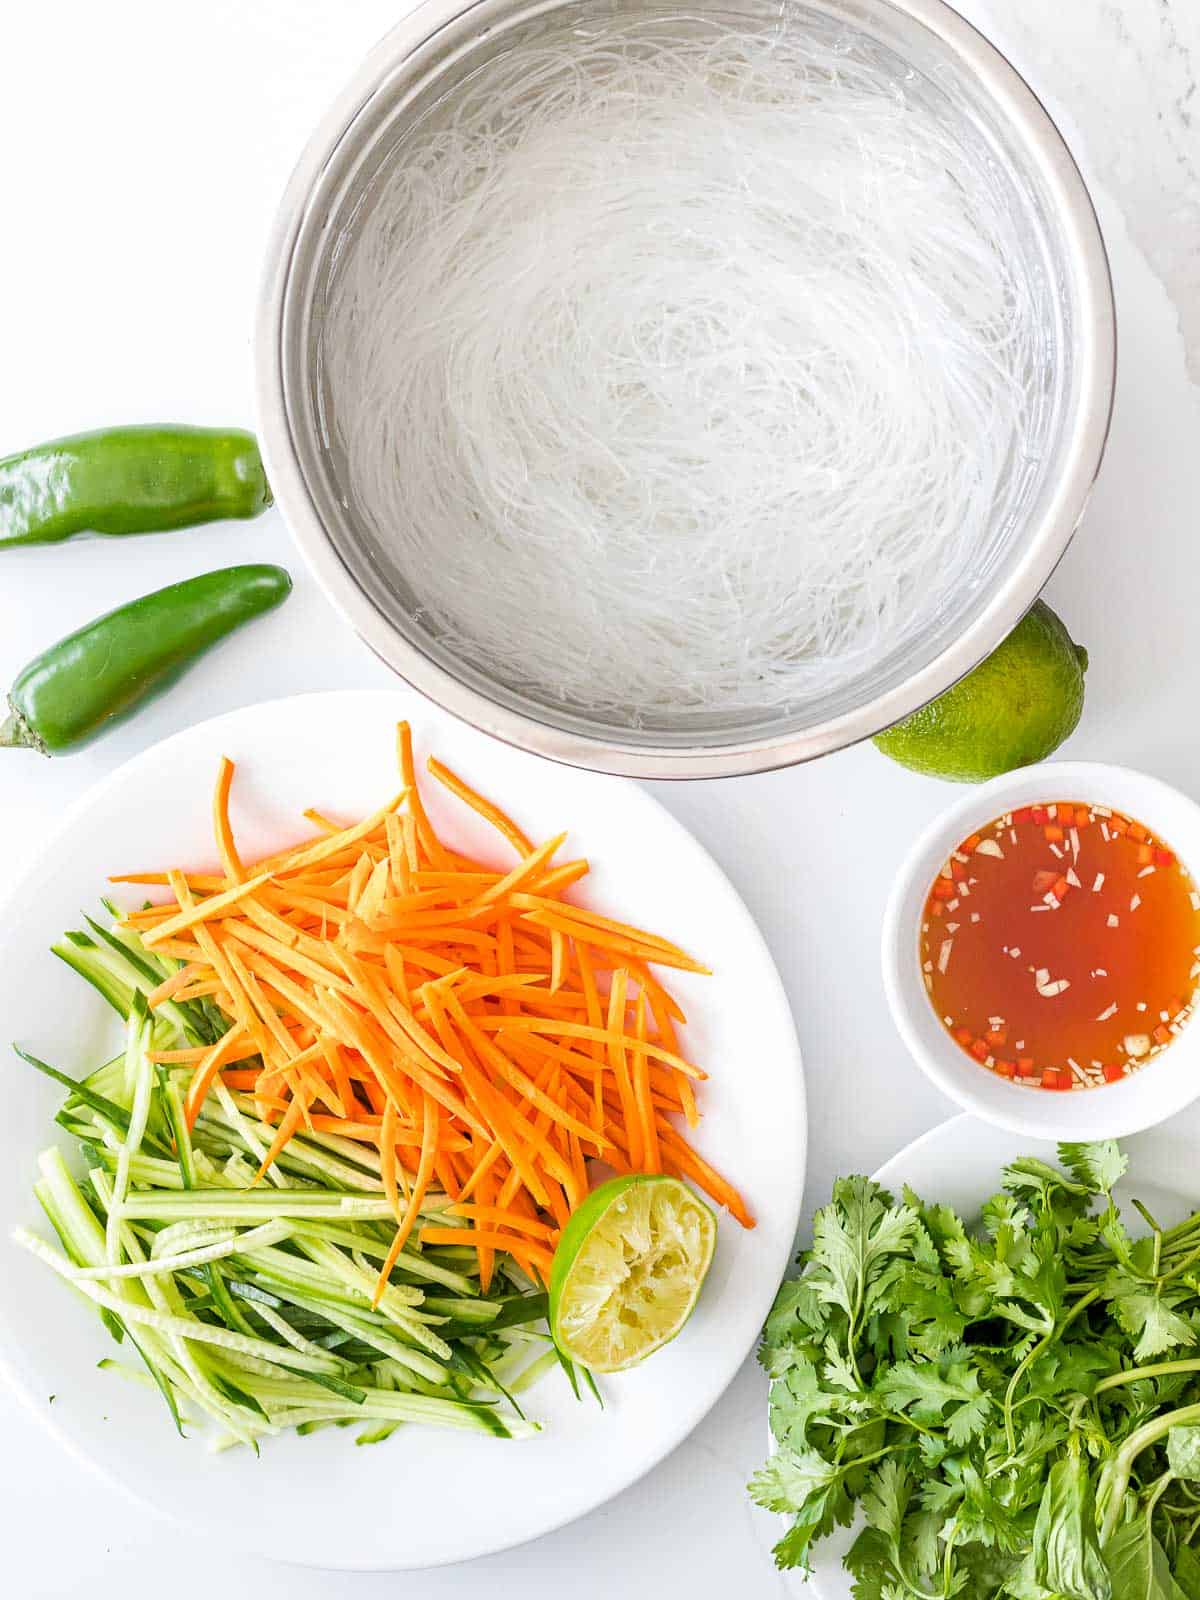 Vermicelli rice noodles in a stainless steel bowl next to carrots, cucumber, lime, vermicelli dressing, and herbs.